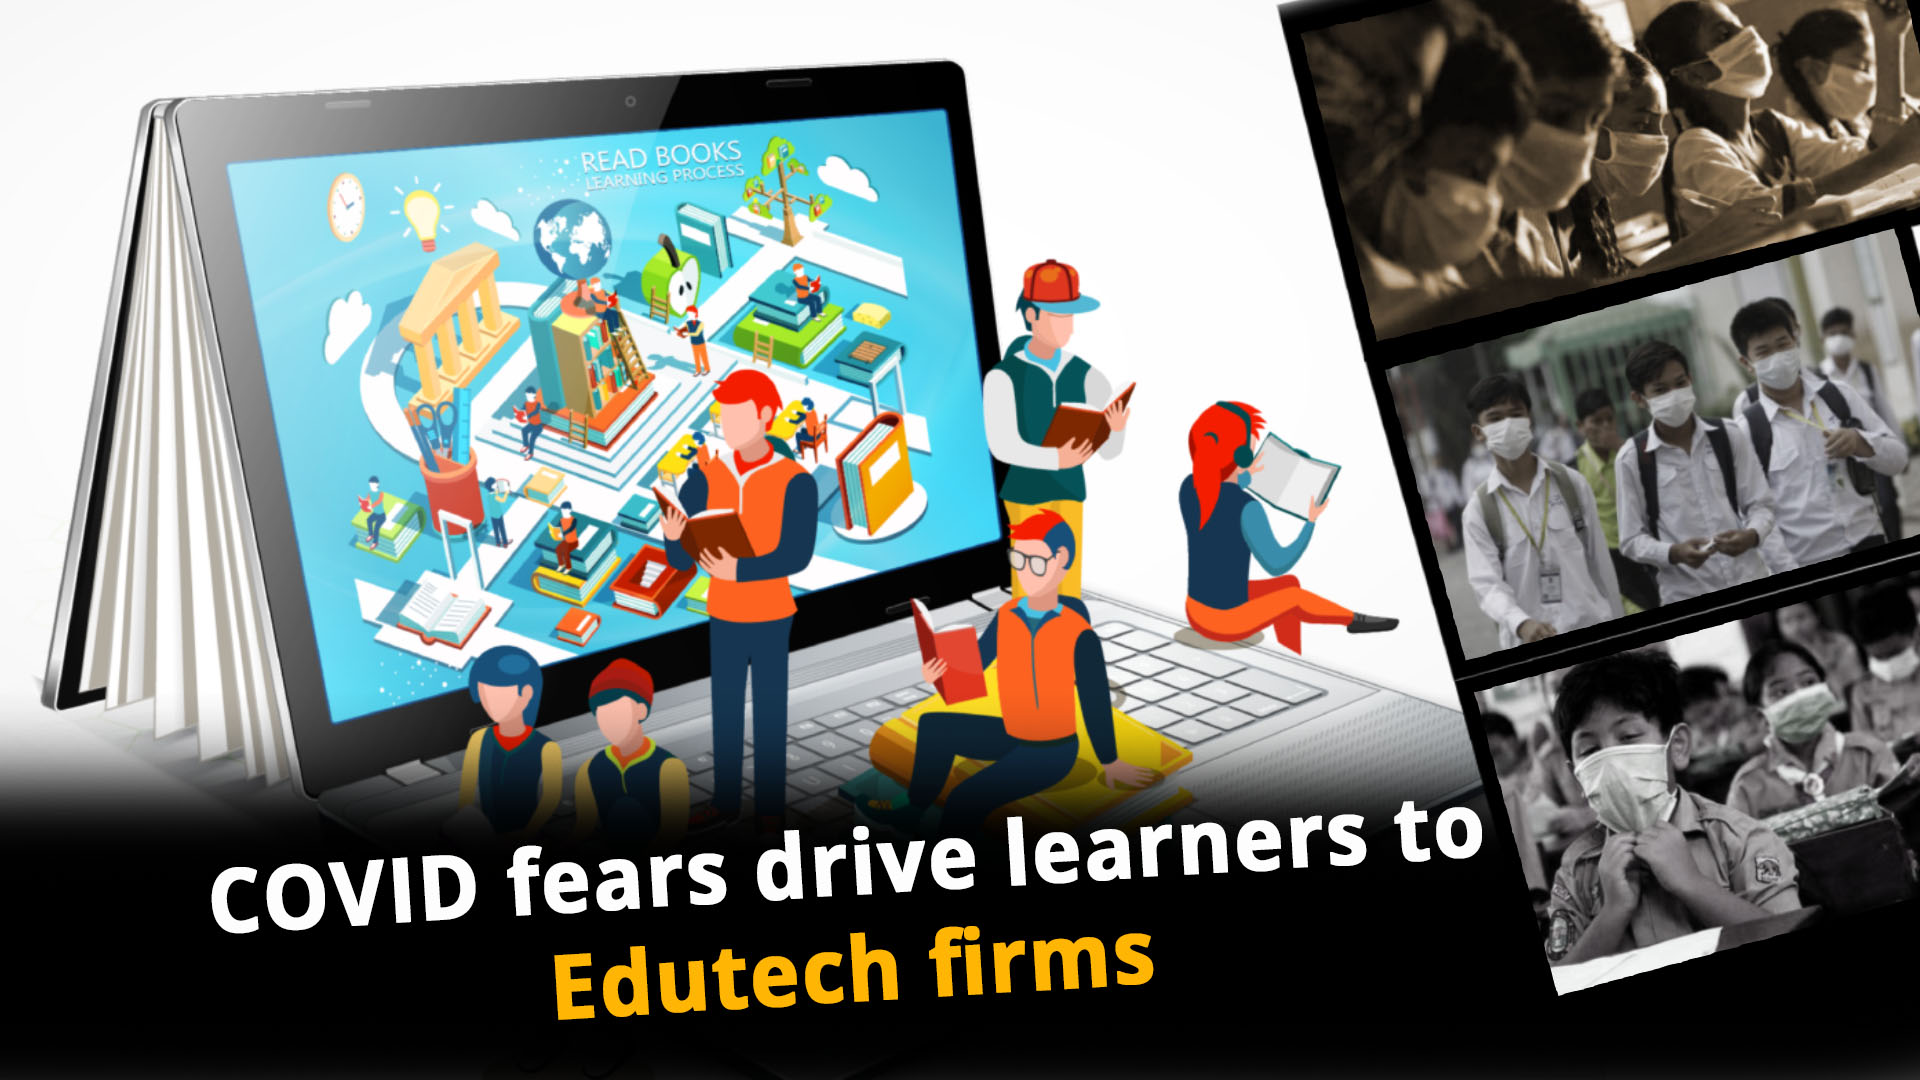 COVID fears drive learners to Edutech firms